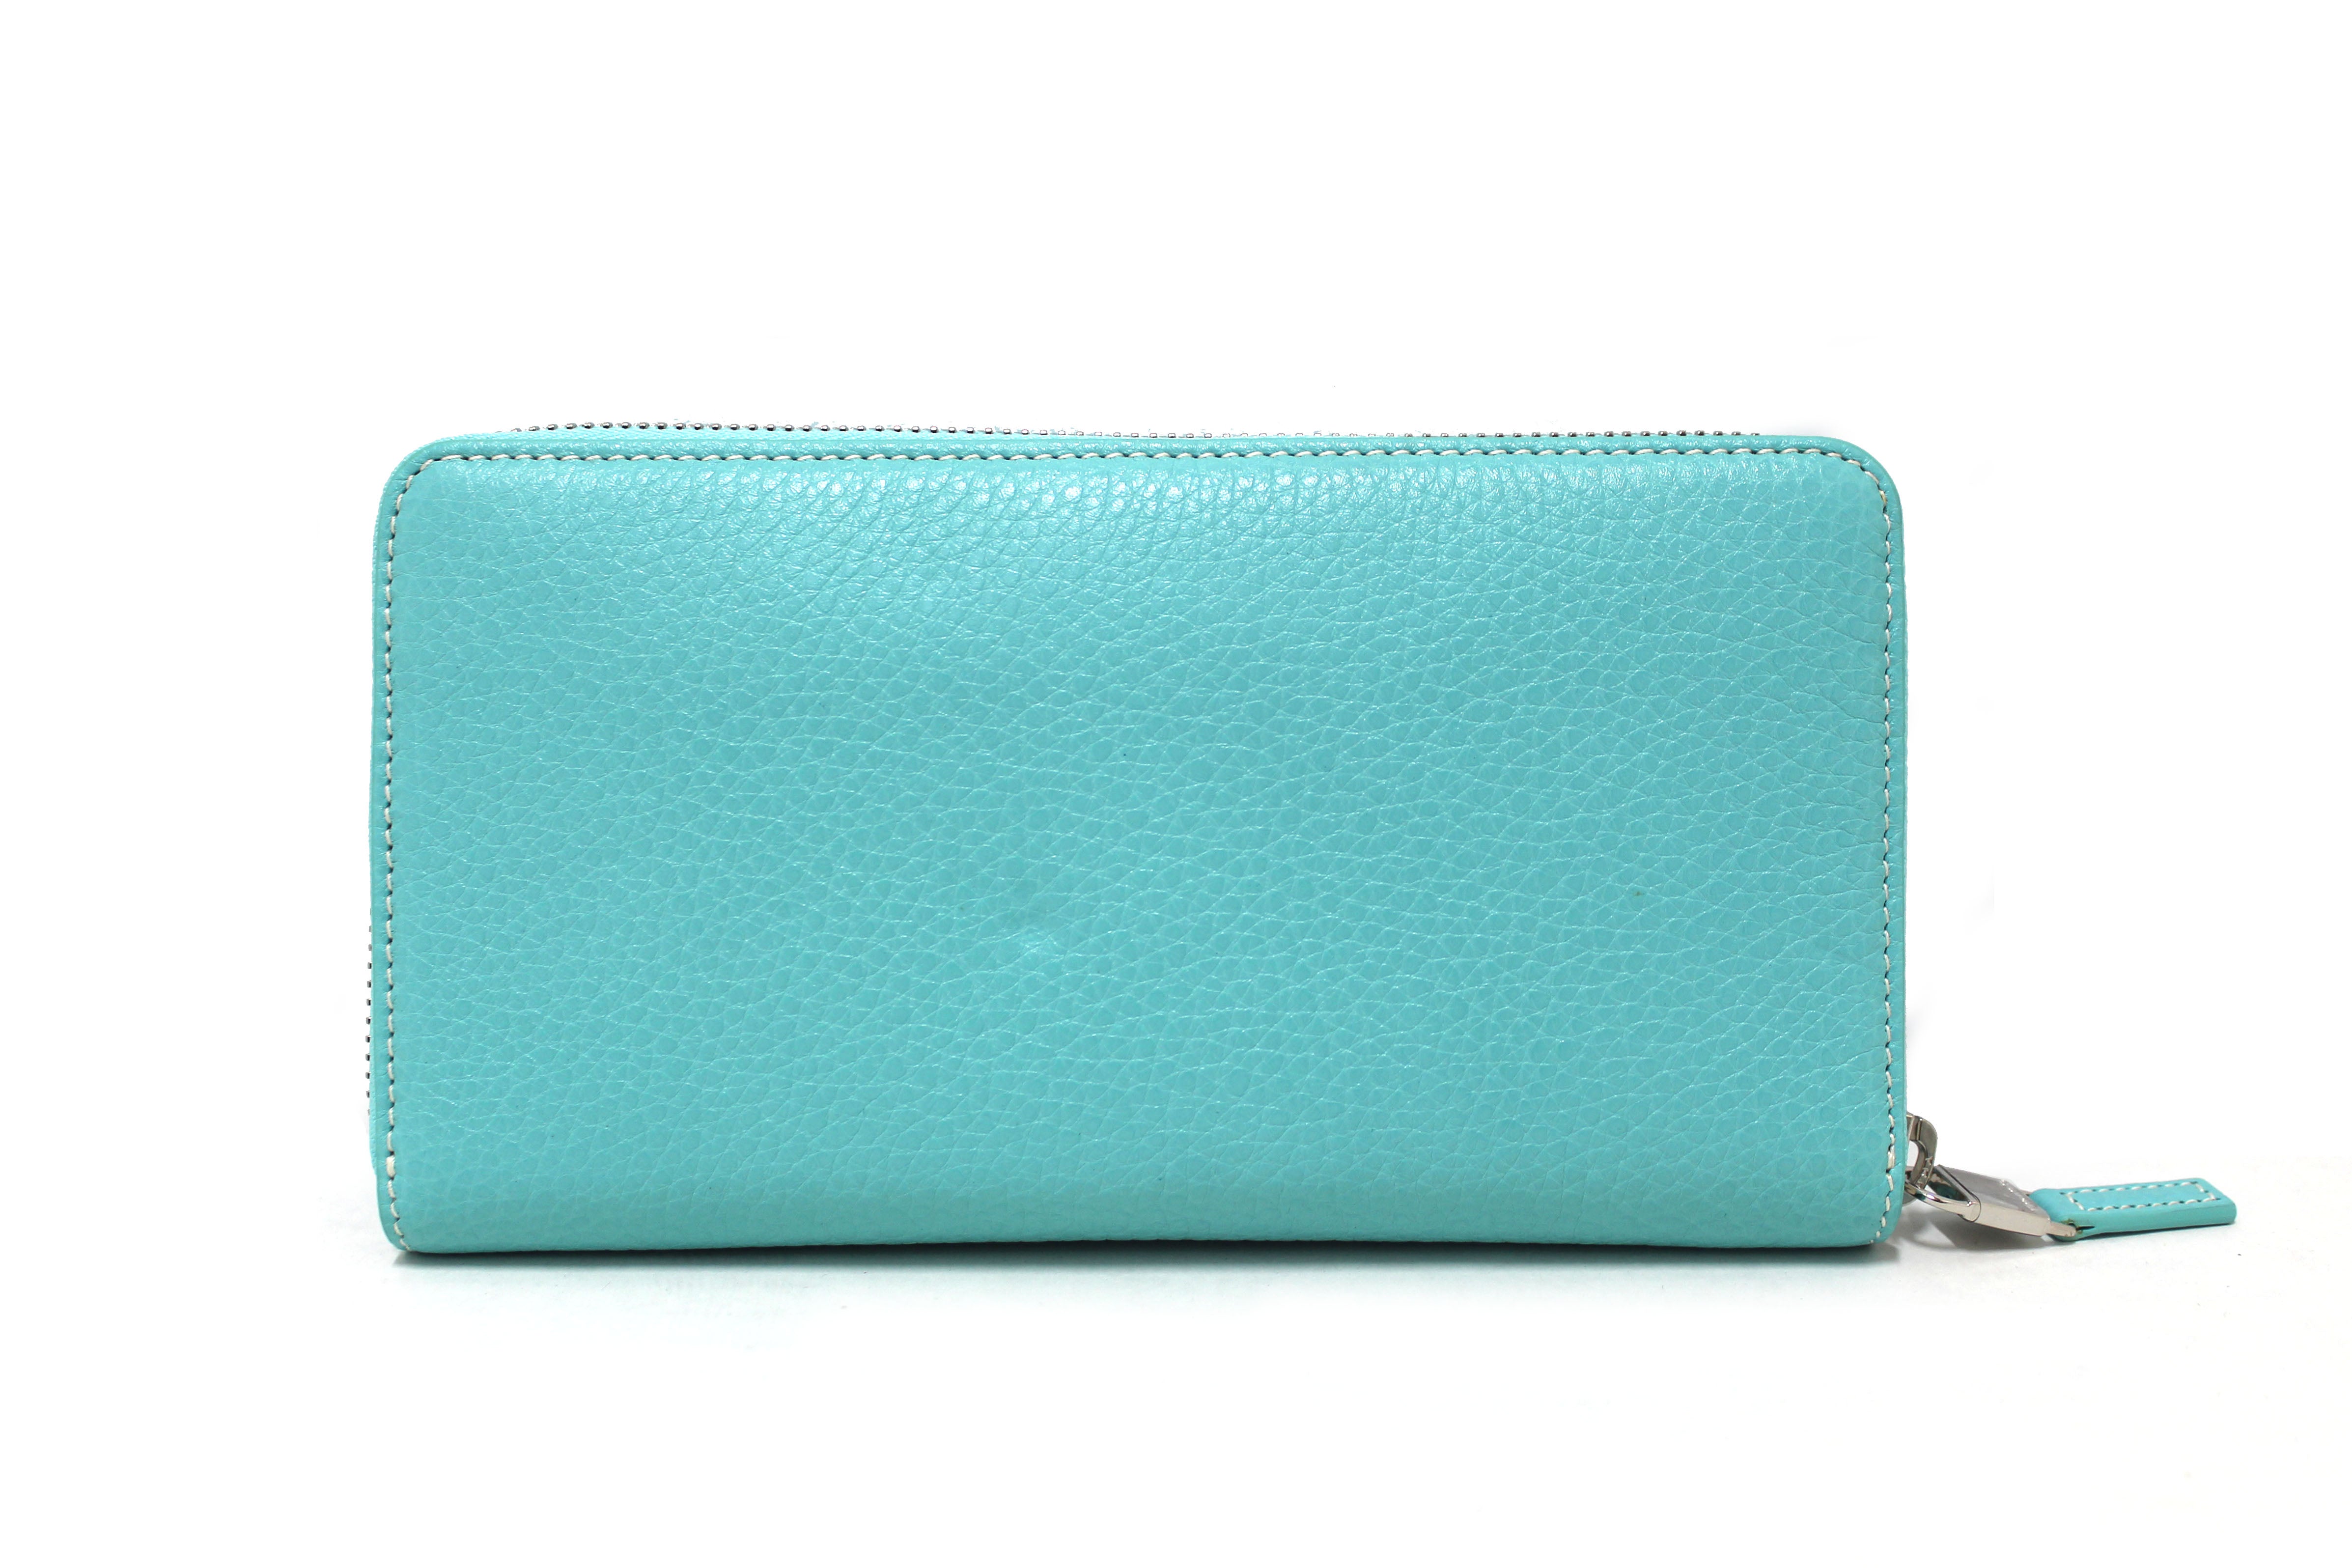 Authentic NEW Tiffany & Co. Blue Calfskin Leather Long Zippy Wallet